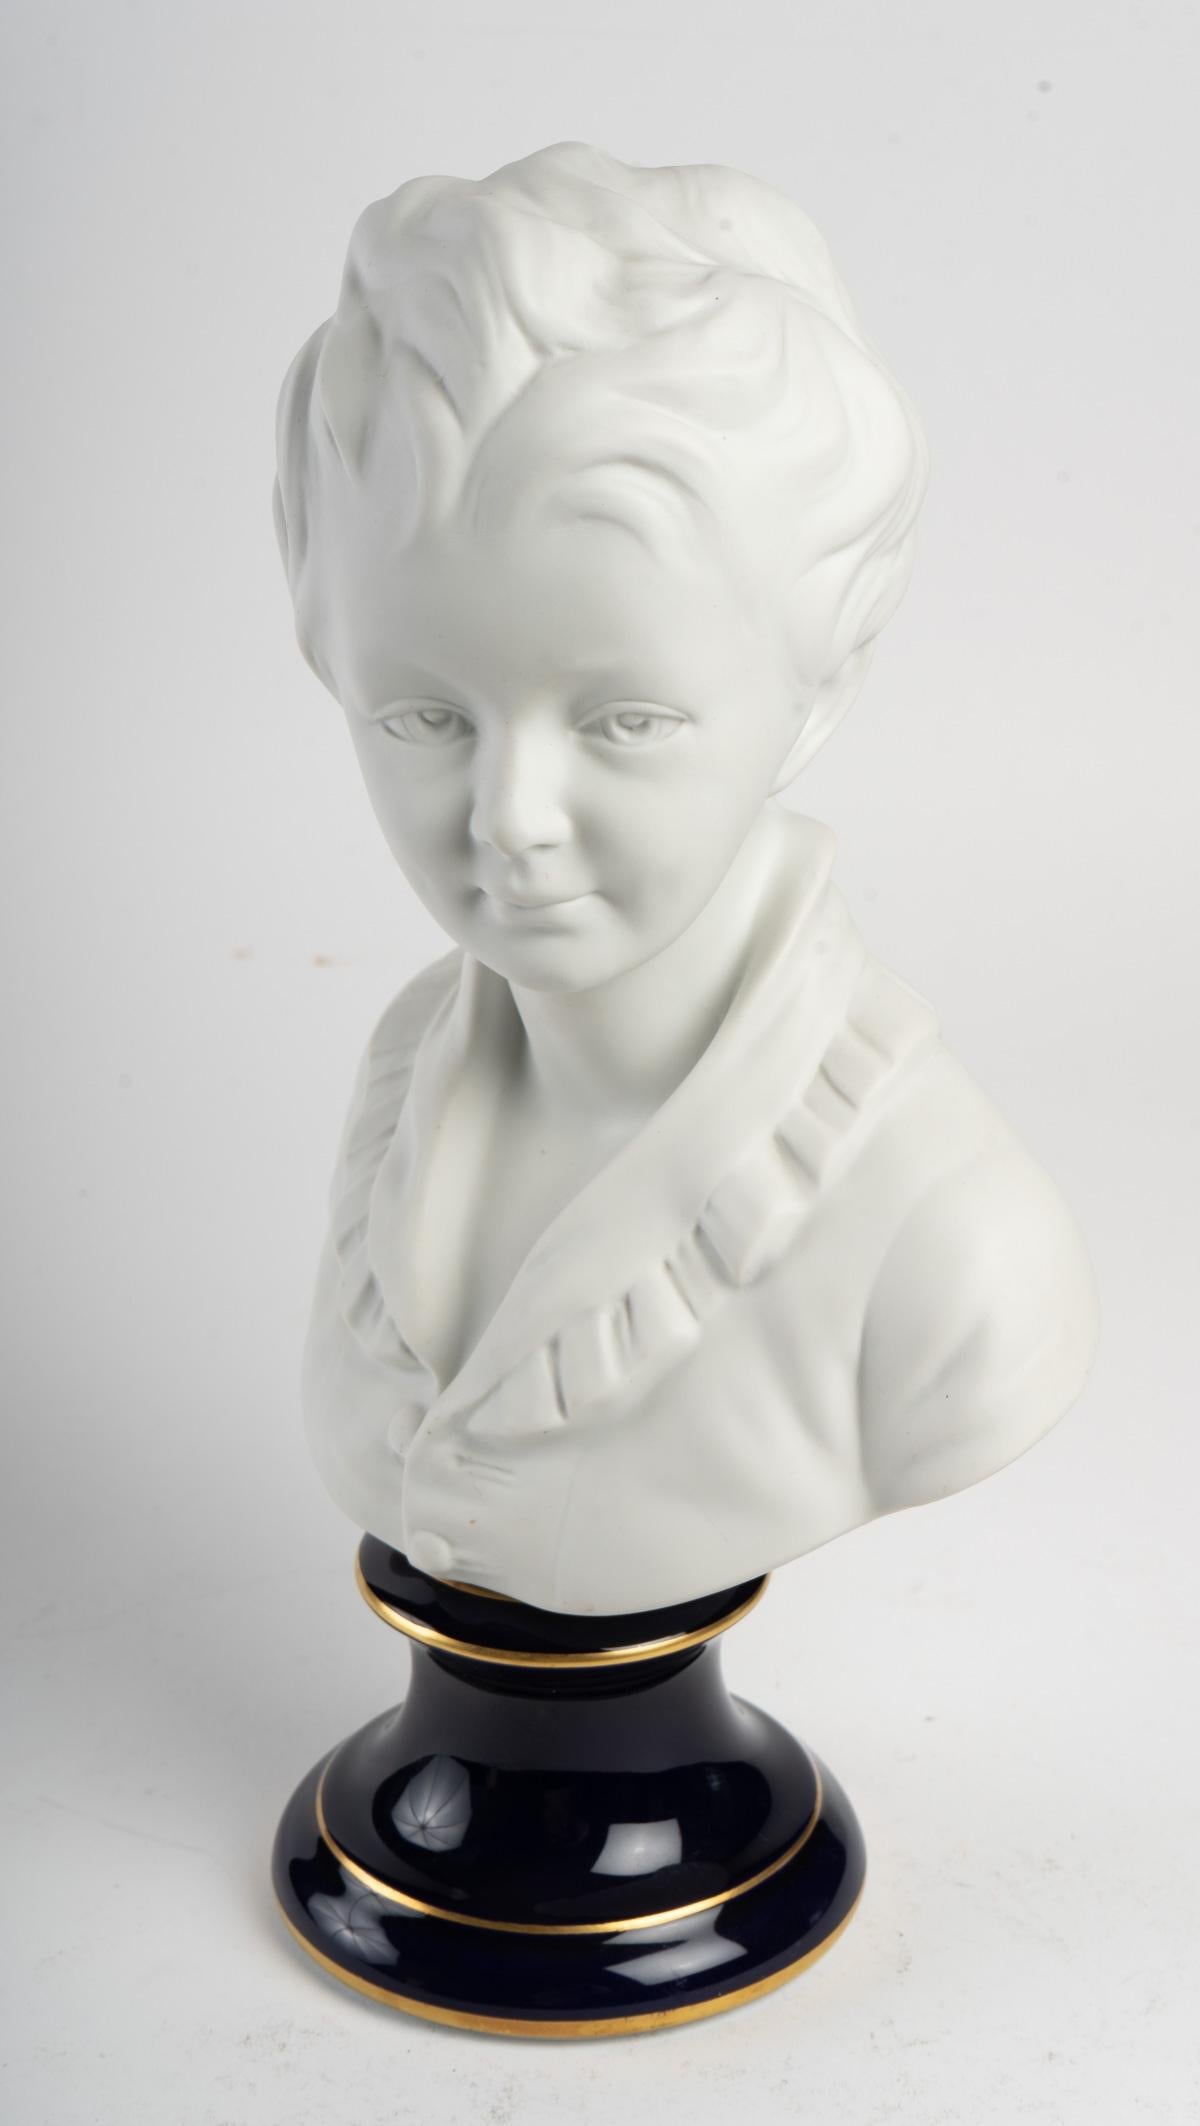 Bust of a child
Bust of a child by Alexandre Brongniart
Marked Porcelain C Tharaud Limoges France
Mid-20th century
Measure: Height approximate 41 cm.